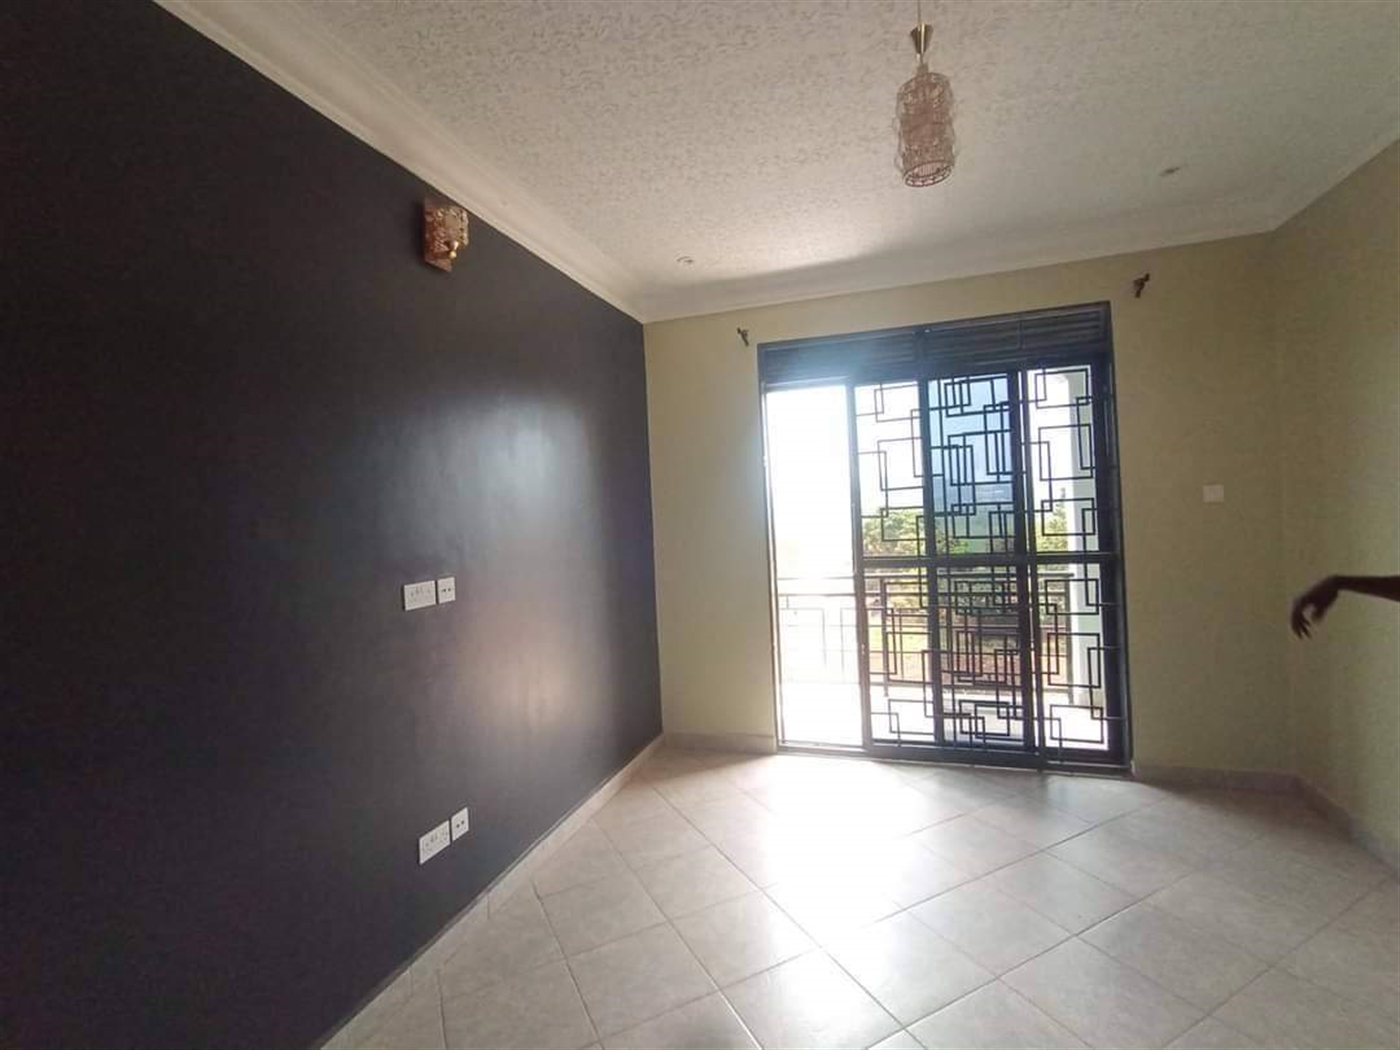 Apartment block for sale in Busaabala Kampala